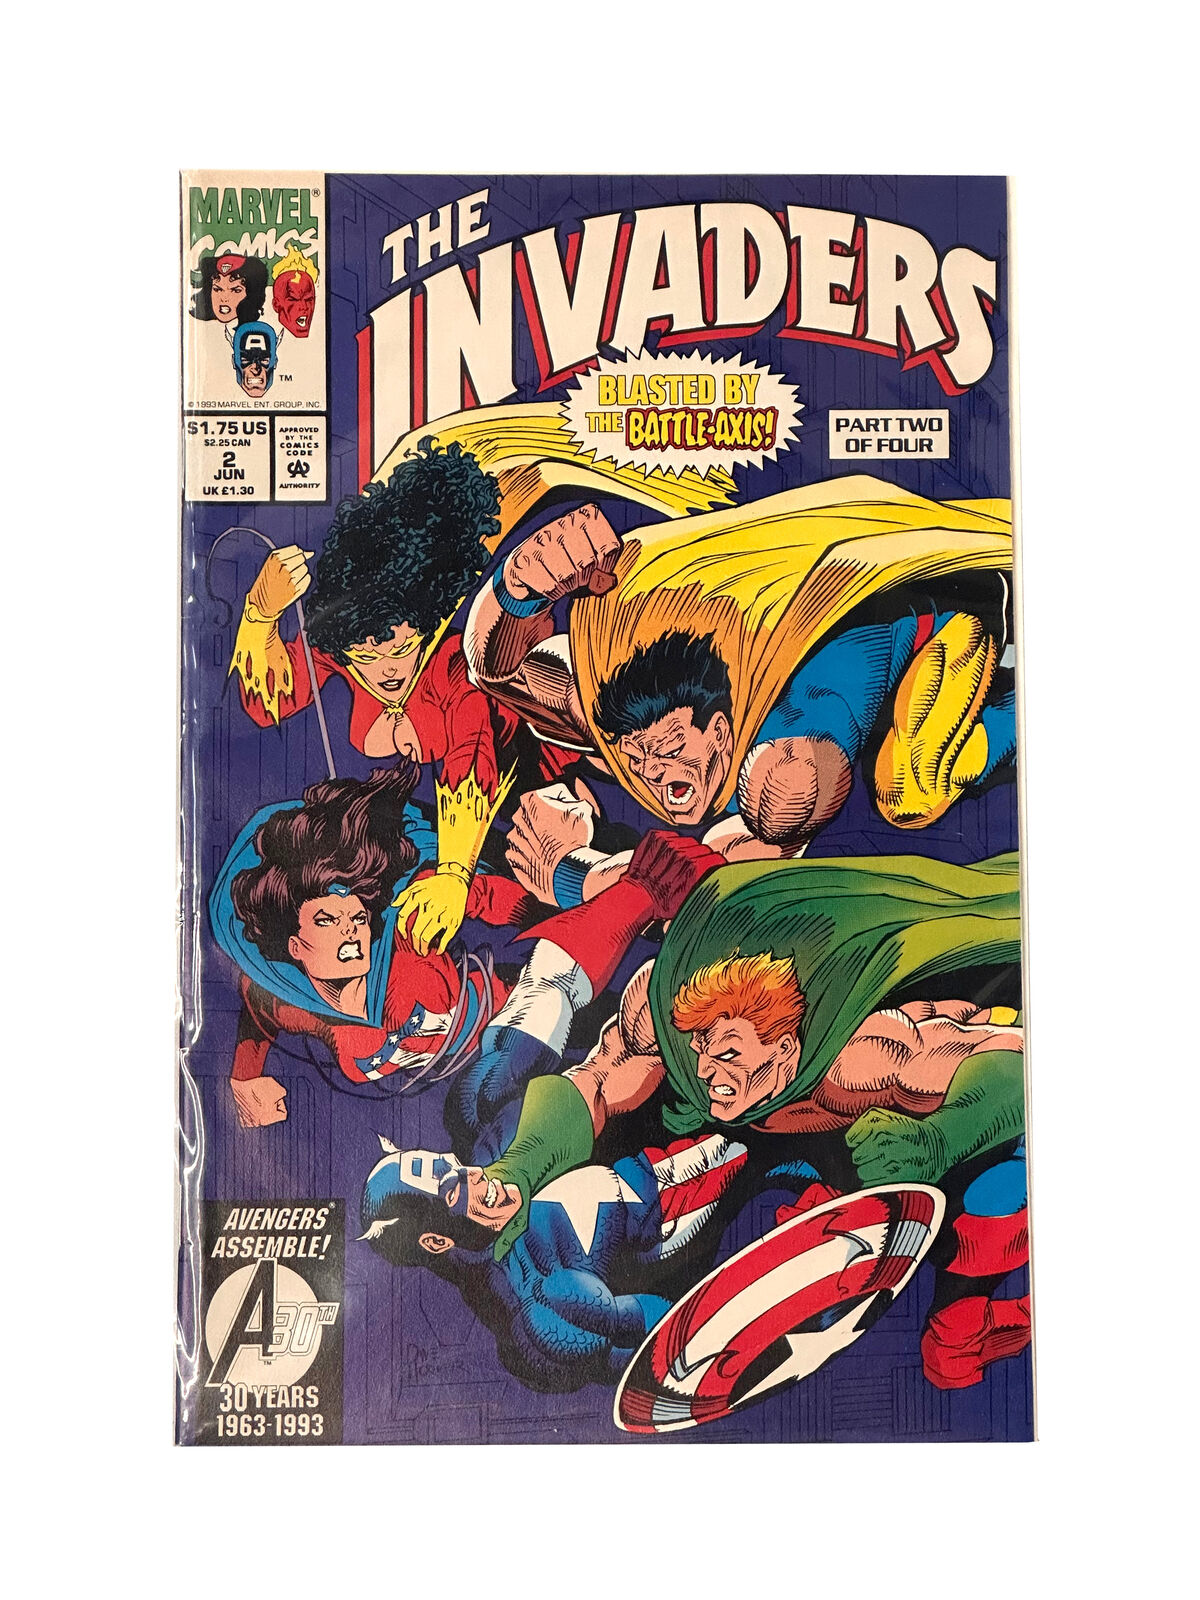 The Invaders: Blasted By The Battle-Axis #2 of 4